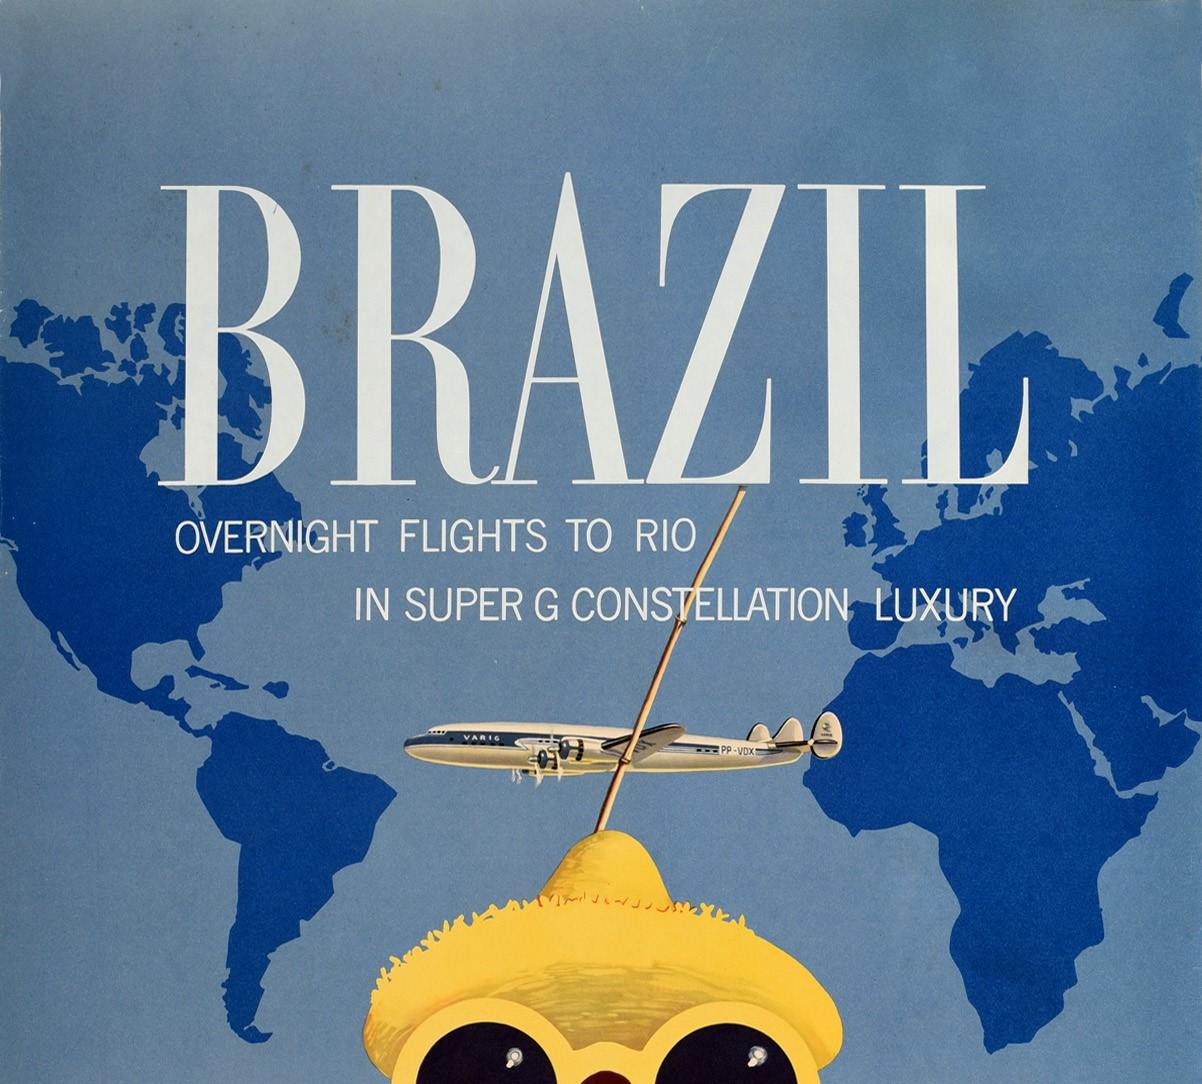 Original vintage travel poster advertising Brazil Overnight Flights to Rio in Super G Constellation Luxury by Varig Airlines featuring a fun design depicting a bird wearing a red and white striped top, straw sun hat and sunglasses looking out to the